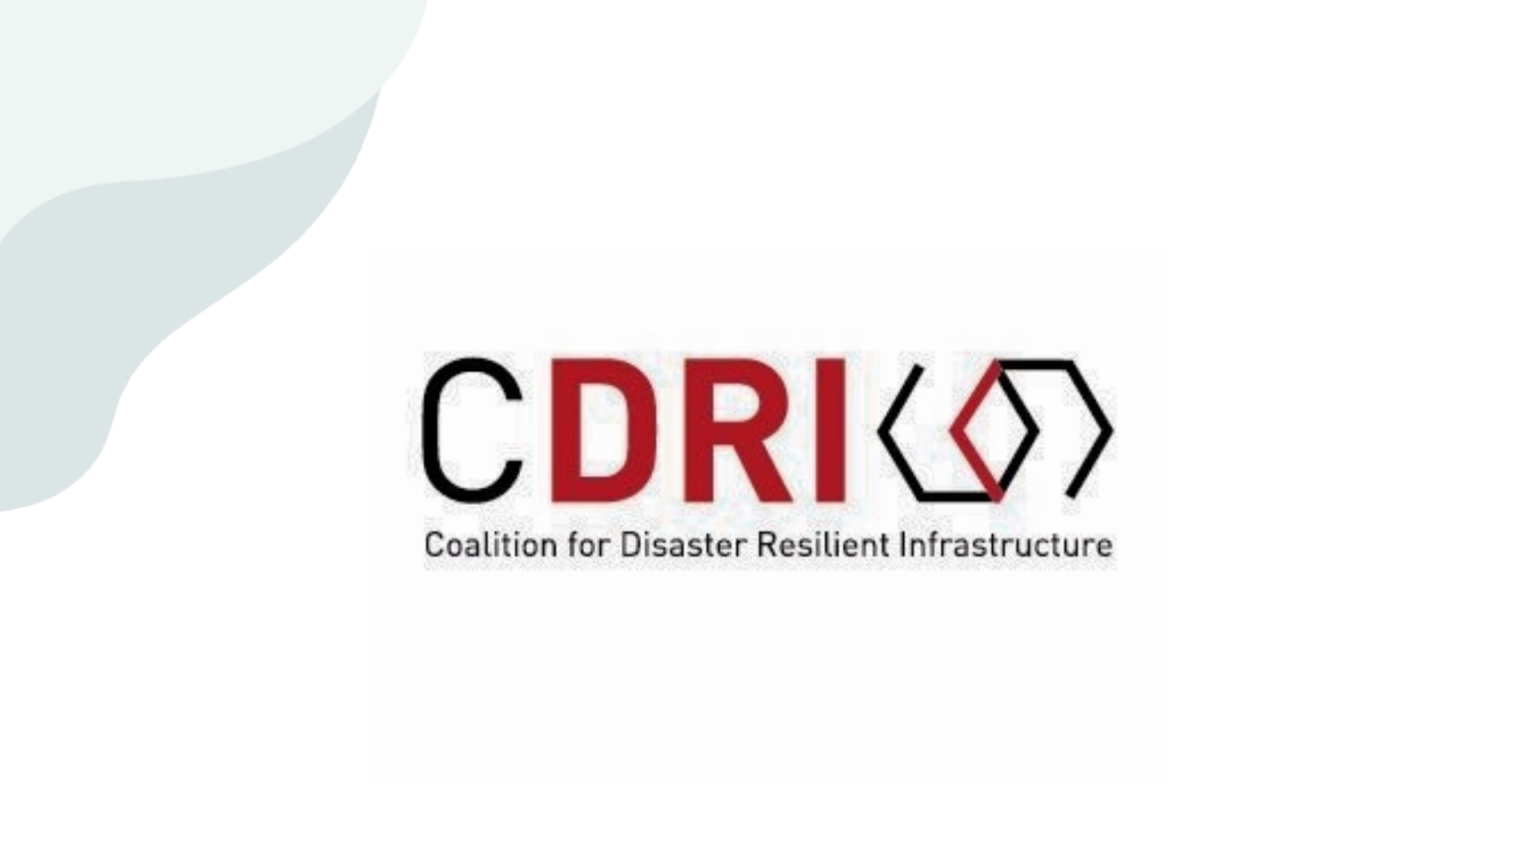 CDRI is now international organization formally after cabinet approval